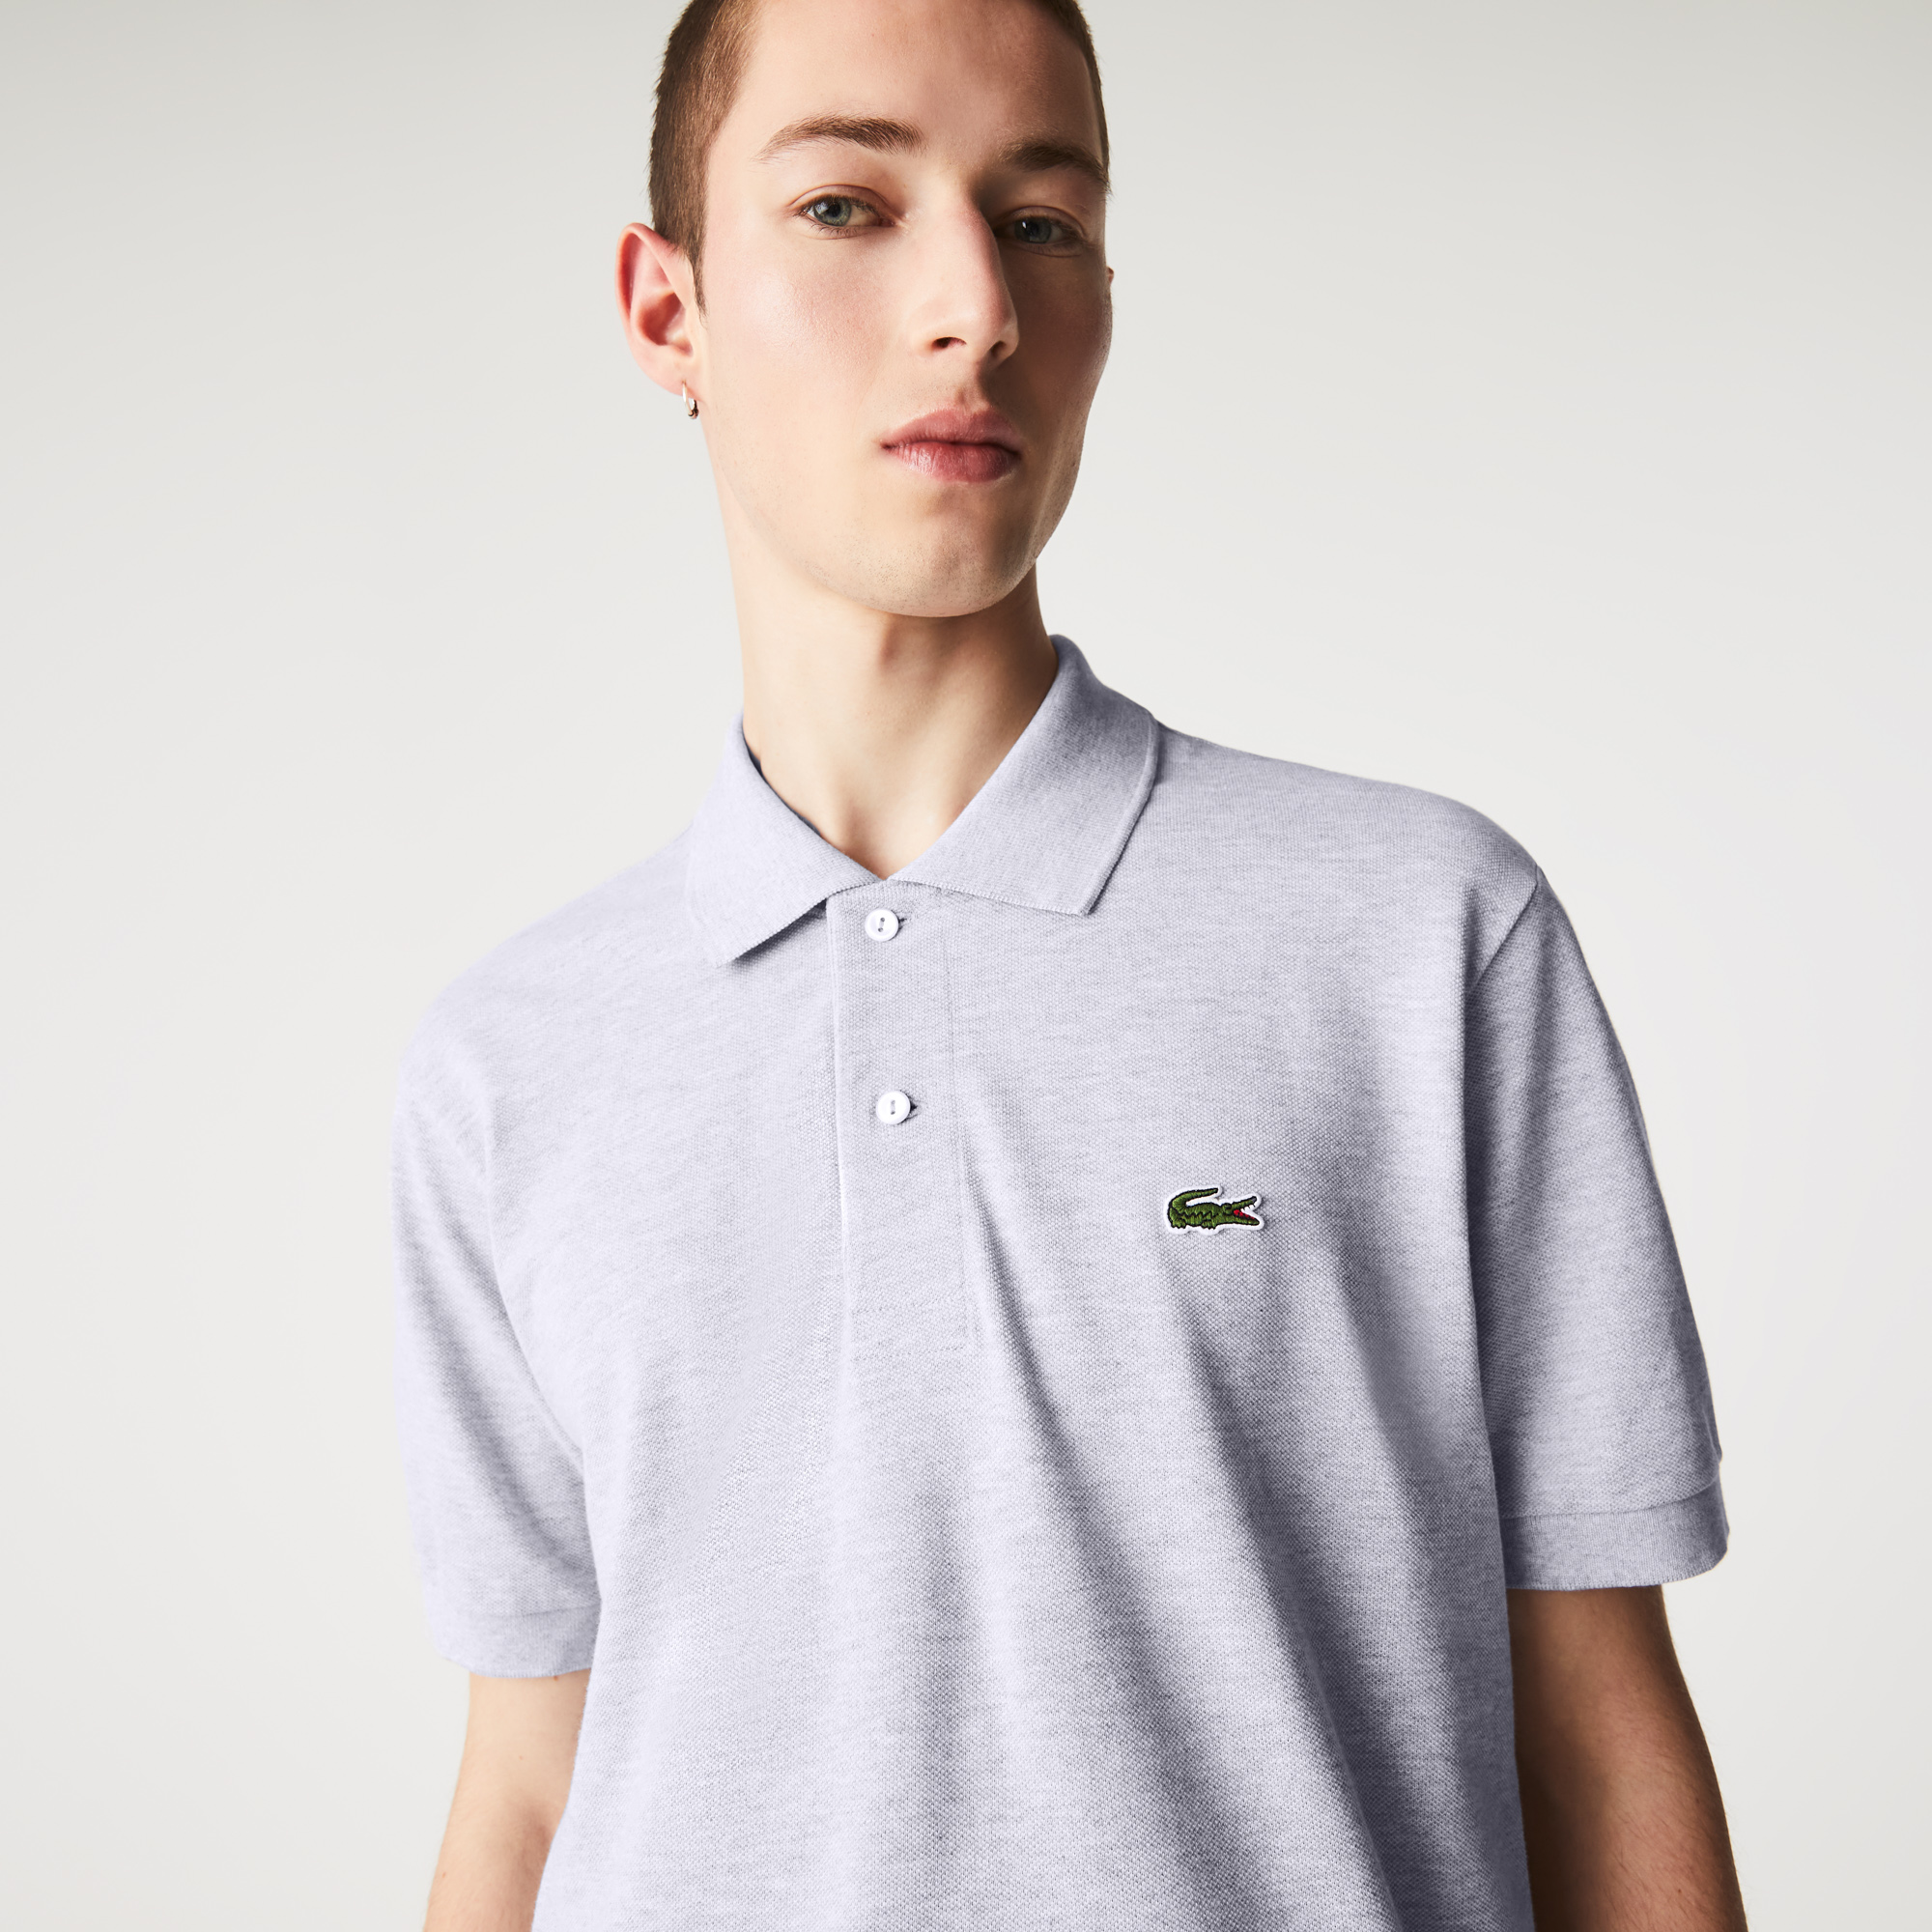 Bug krans Enkelhed Lacoste Grey Chine Classic Fit L.12.12 Polo Shirt | The Rainy Days